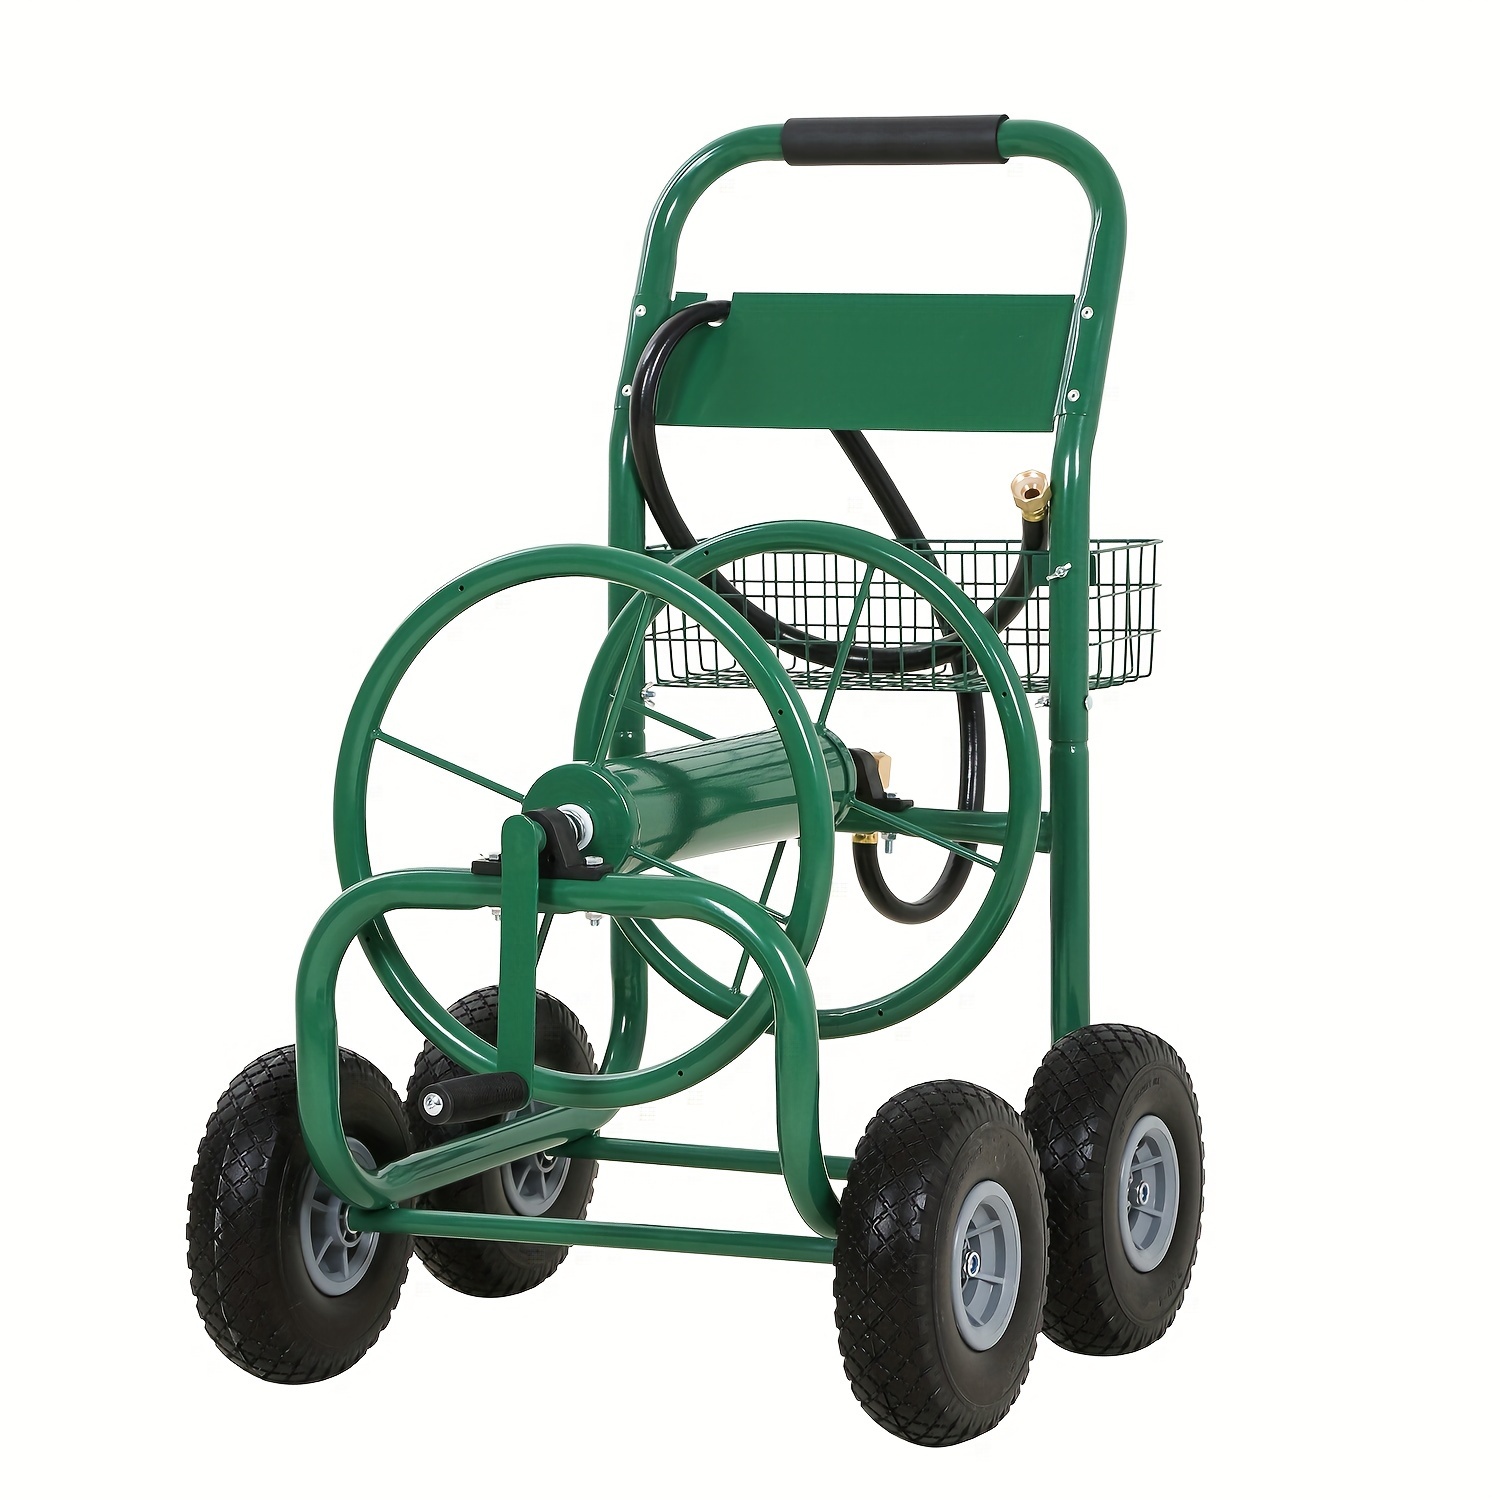 

4-wheel Garden Hose Reel Cart With Storage Basket, Portable Residential Hose Reel Cart, Lawn Watering, For Garden Backyard And Farm